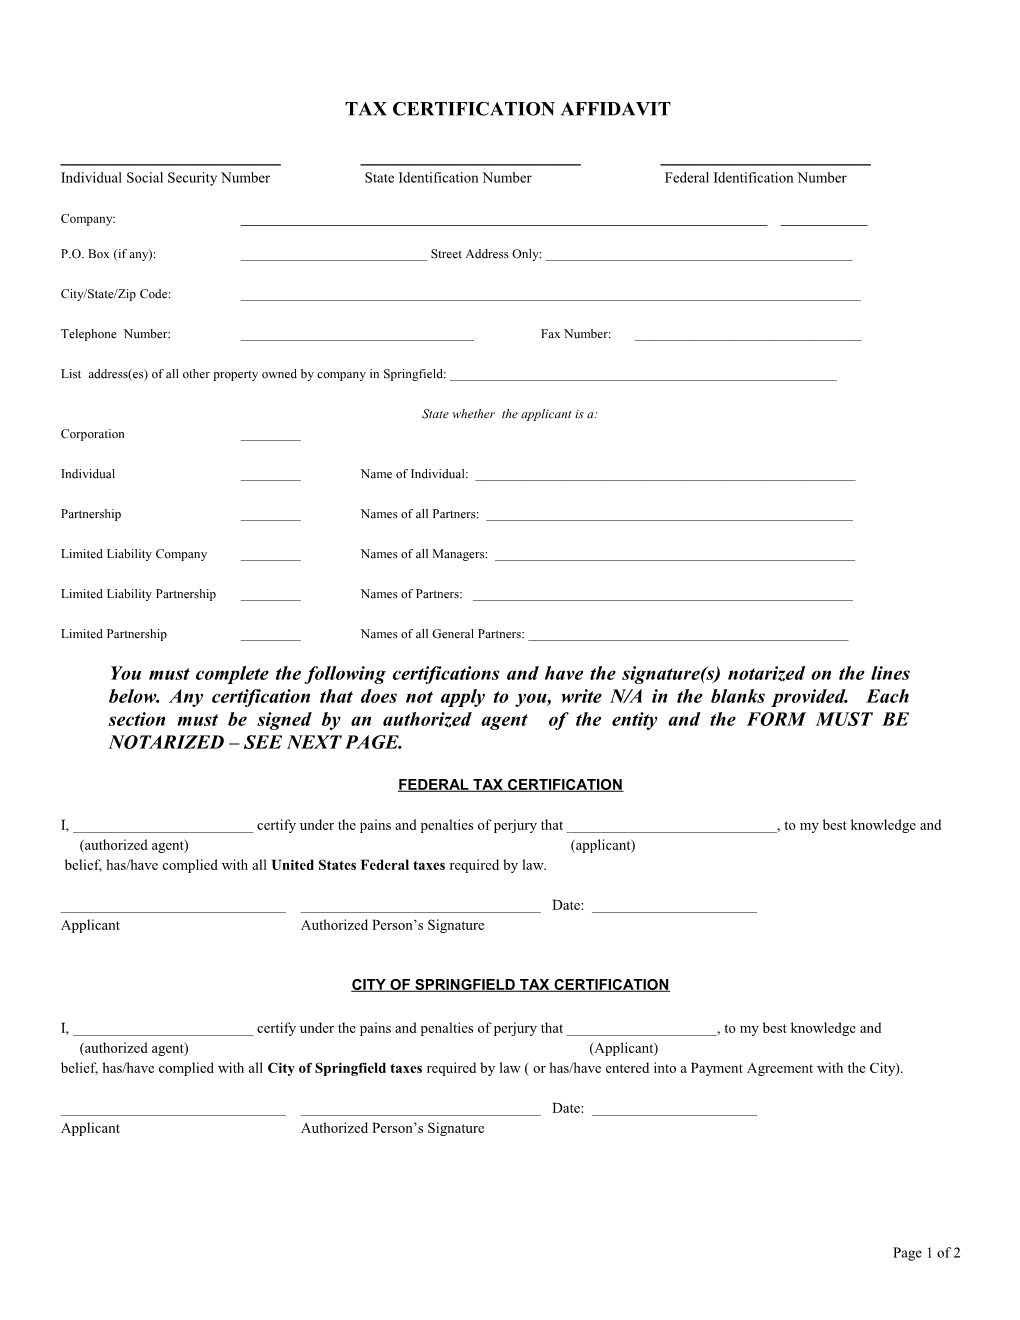 Tax Certification Affidavit for Contracts